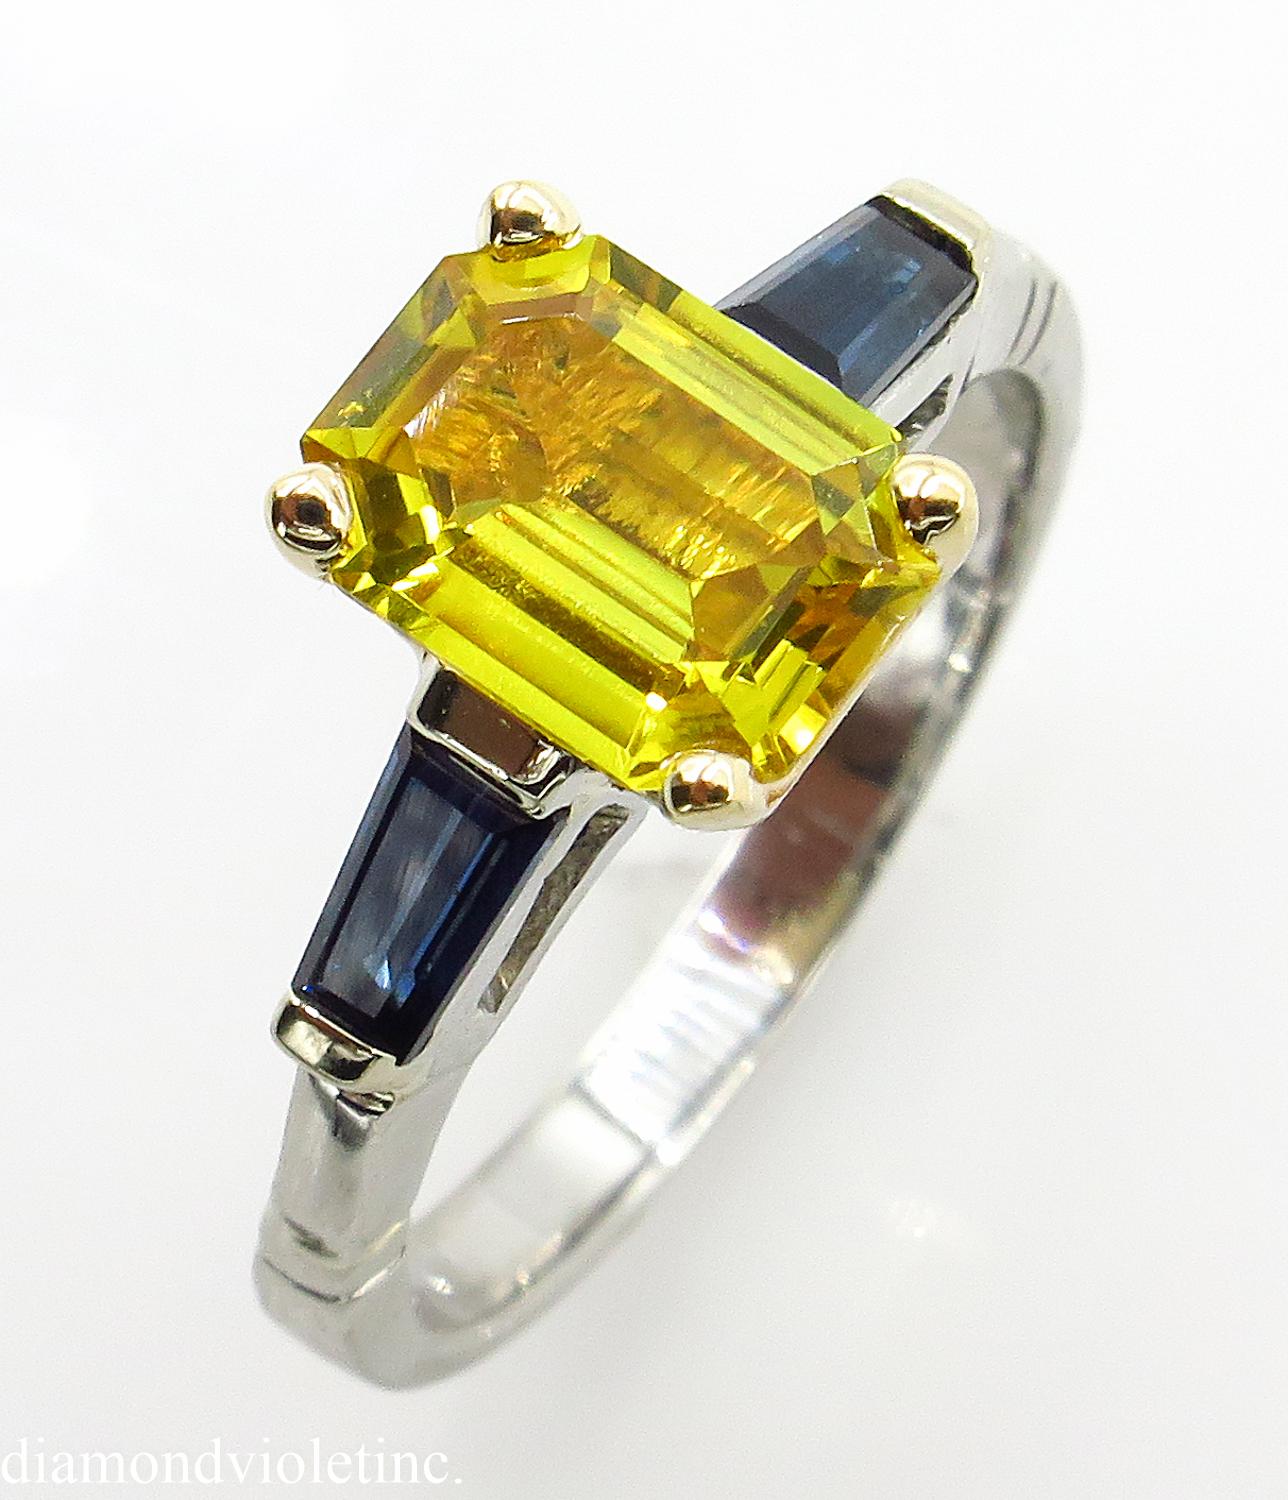 A Breathtaking Estate Vintage HANDMADE Platinum (tested) Engagement ring dazzles GIA certified NATURAL Emerald cut Yellow Sapphire; with measurements of 8.04x5.99mm; estimated weight is 1.57ct. GIA report # 5191337924. The center stone is set into